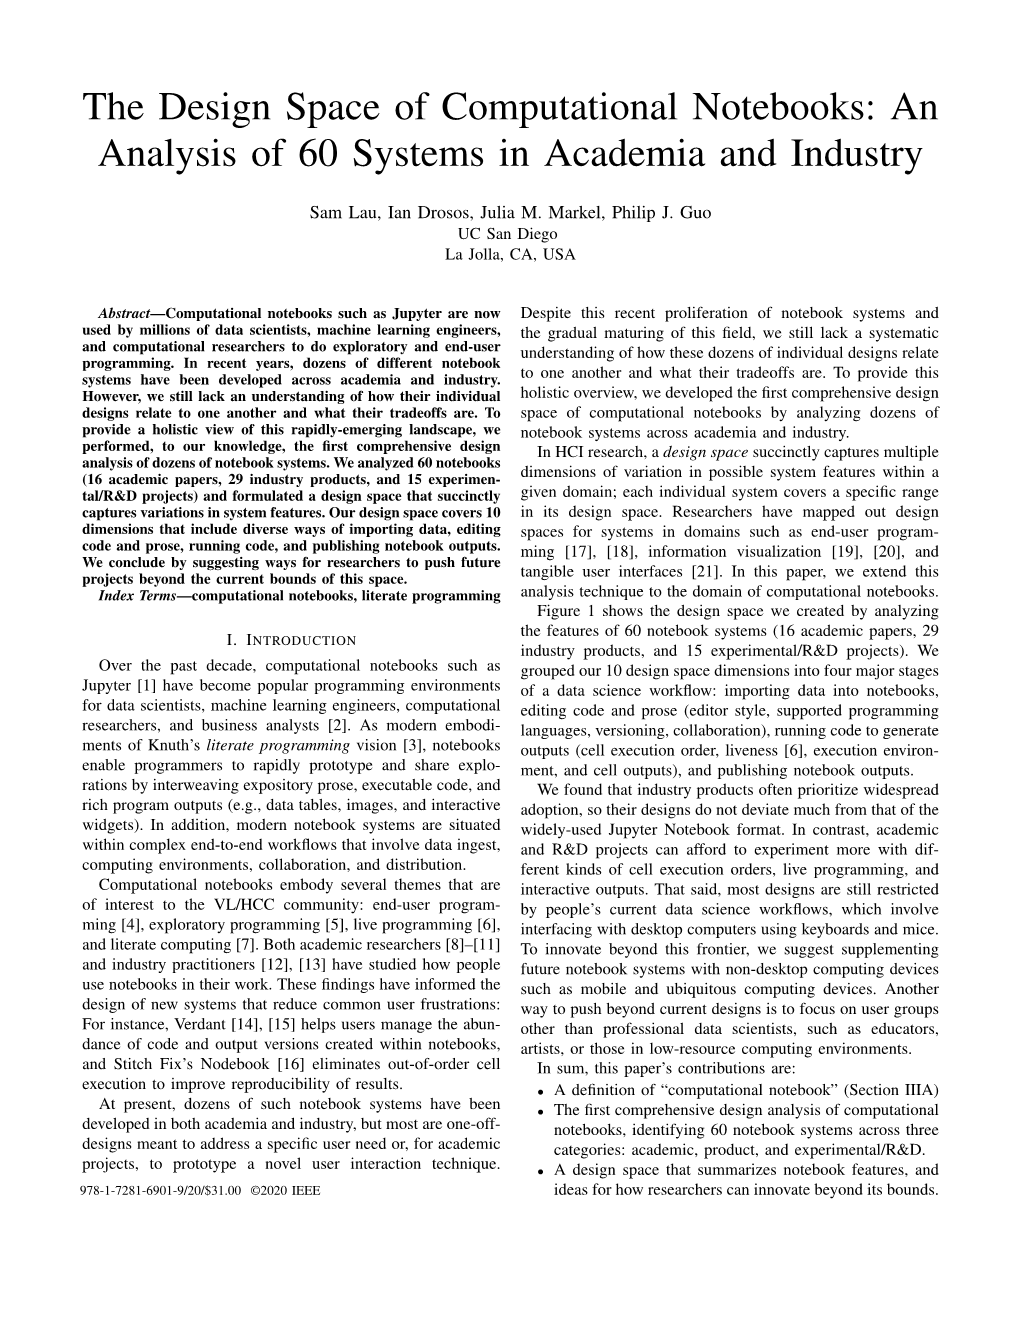 The Design Space of Computational Notebooks: an Analysis of 60 Systems in Academia and Industry